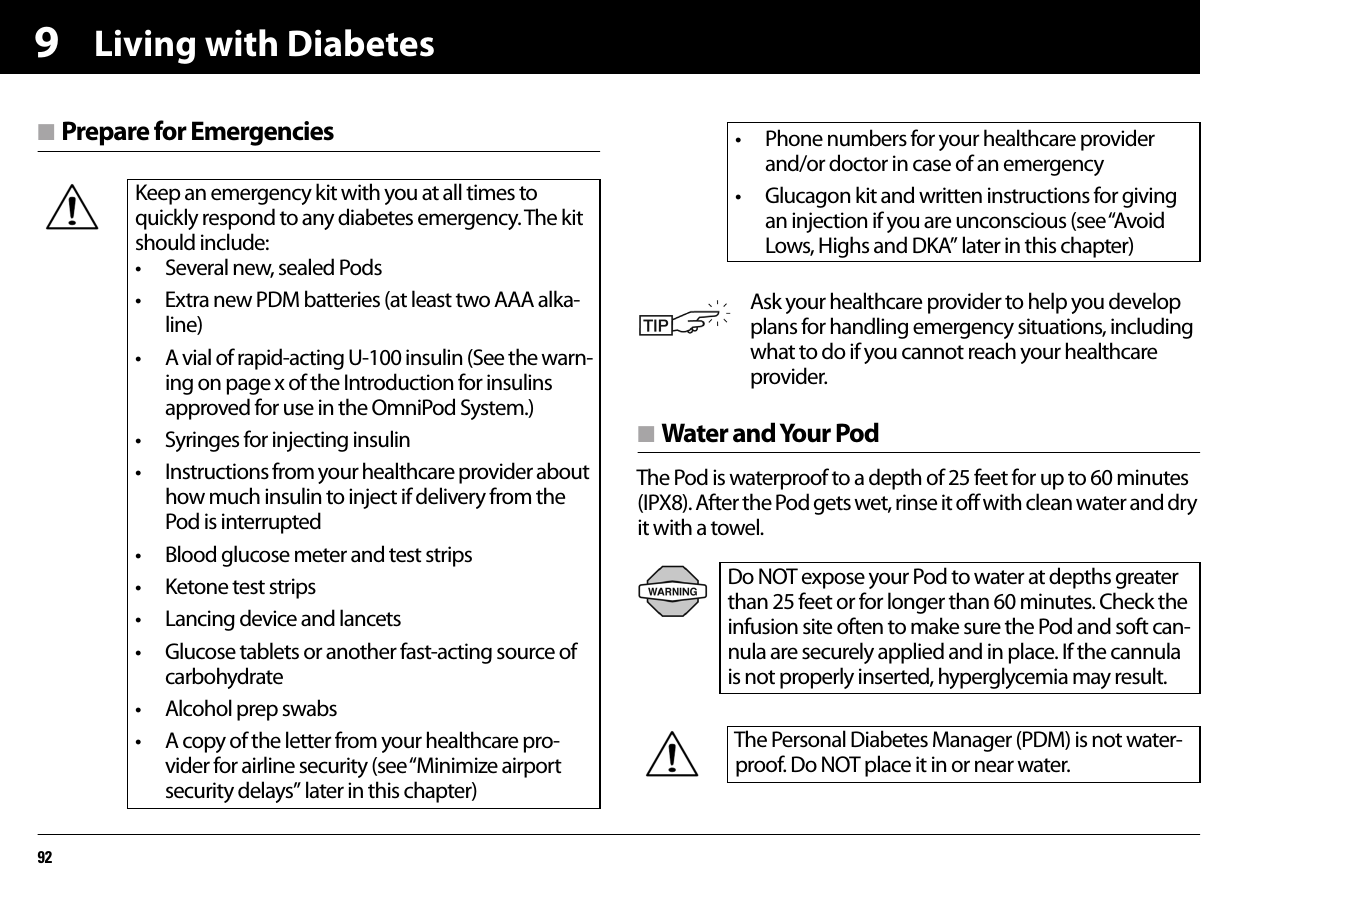 Living with Diabetes929n Prepare for Emergenciesn Water and Your PodThe Pod is waterproof to a depth of 25 feet for up to 60 minutes (IPX8). After the Pod gets wet, rinse it off with clean water and dry it with a towel.   Keep an emergency kit with you at all times to quickly respond to any diabetes emergency. The kit should include:• Several new, sealed Pods• Extra new PDM batteries (at least two AAA alka-line)• A vial of rapid-acting U-100 insulin (See the warn-ing on page x of the Introduction for insulins approved for use in the OmniPod System.)• Syringes for injecting insulin• Instructions from your healthcare provider about how much insulin to inject if delivery from the Pod is interrupted• Blood glucose meter and test strips• Ketone test strips• Lancing device and lancets• Glucose tablets or another fast-acting source of carbohydrate• Alcohol prep swabs• A copy of the letter from your healthcare pro-vider for airline security (see “Minimize airport security delays” later in this chapter)• Phone numbers for your healthcare provider and/or doctor in case of an emergency• Glucagon kit and written instructions for giving an injection if you are unconscious (see “Avoid Lows, Highs and DKA” later in this chapter)Ask your healthcare provider to help you develop plans for handling emergency situations, including what to do if you cannot reach your healthcare provider.Do NOT expose your Pod to water at depths greater than 25 feet or for longer than 60 minutes. Check the infusion site often to make sure the Pod and soft can-nula are securely applied and in place. If the cannula is not properly inserted, hyperglycemia may result.The Personal Diabetes Manager (PDM) is not water-proof. Do NOT place it in or near water.